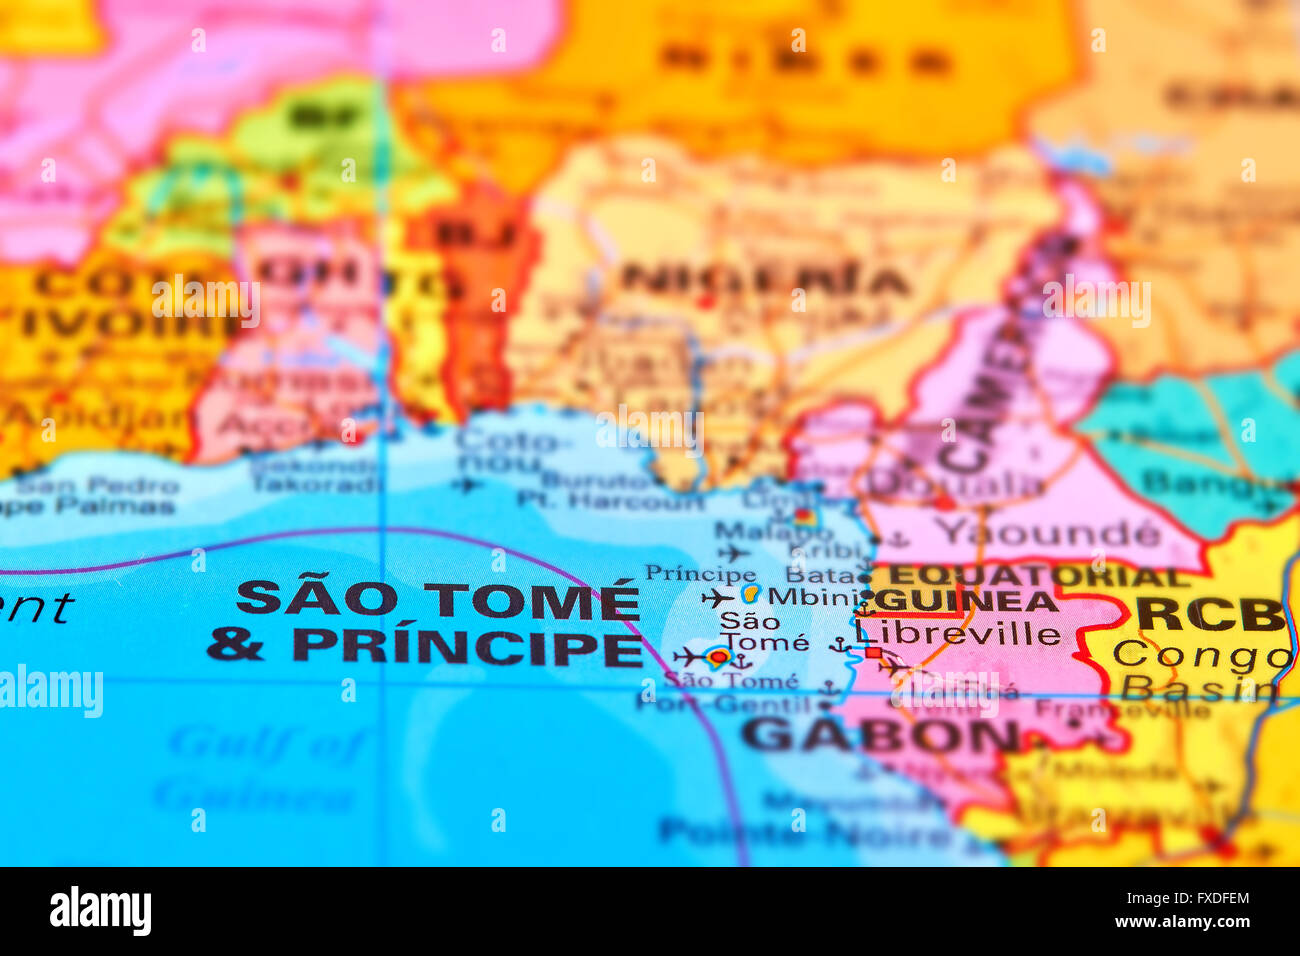 Sao Tome and Principe in Africa on the World Map Stock Photo